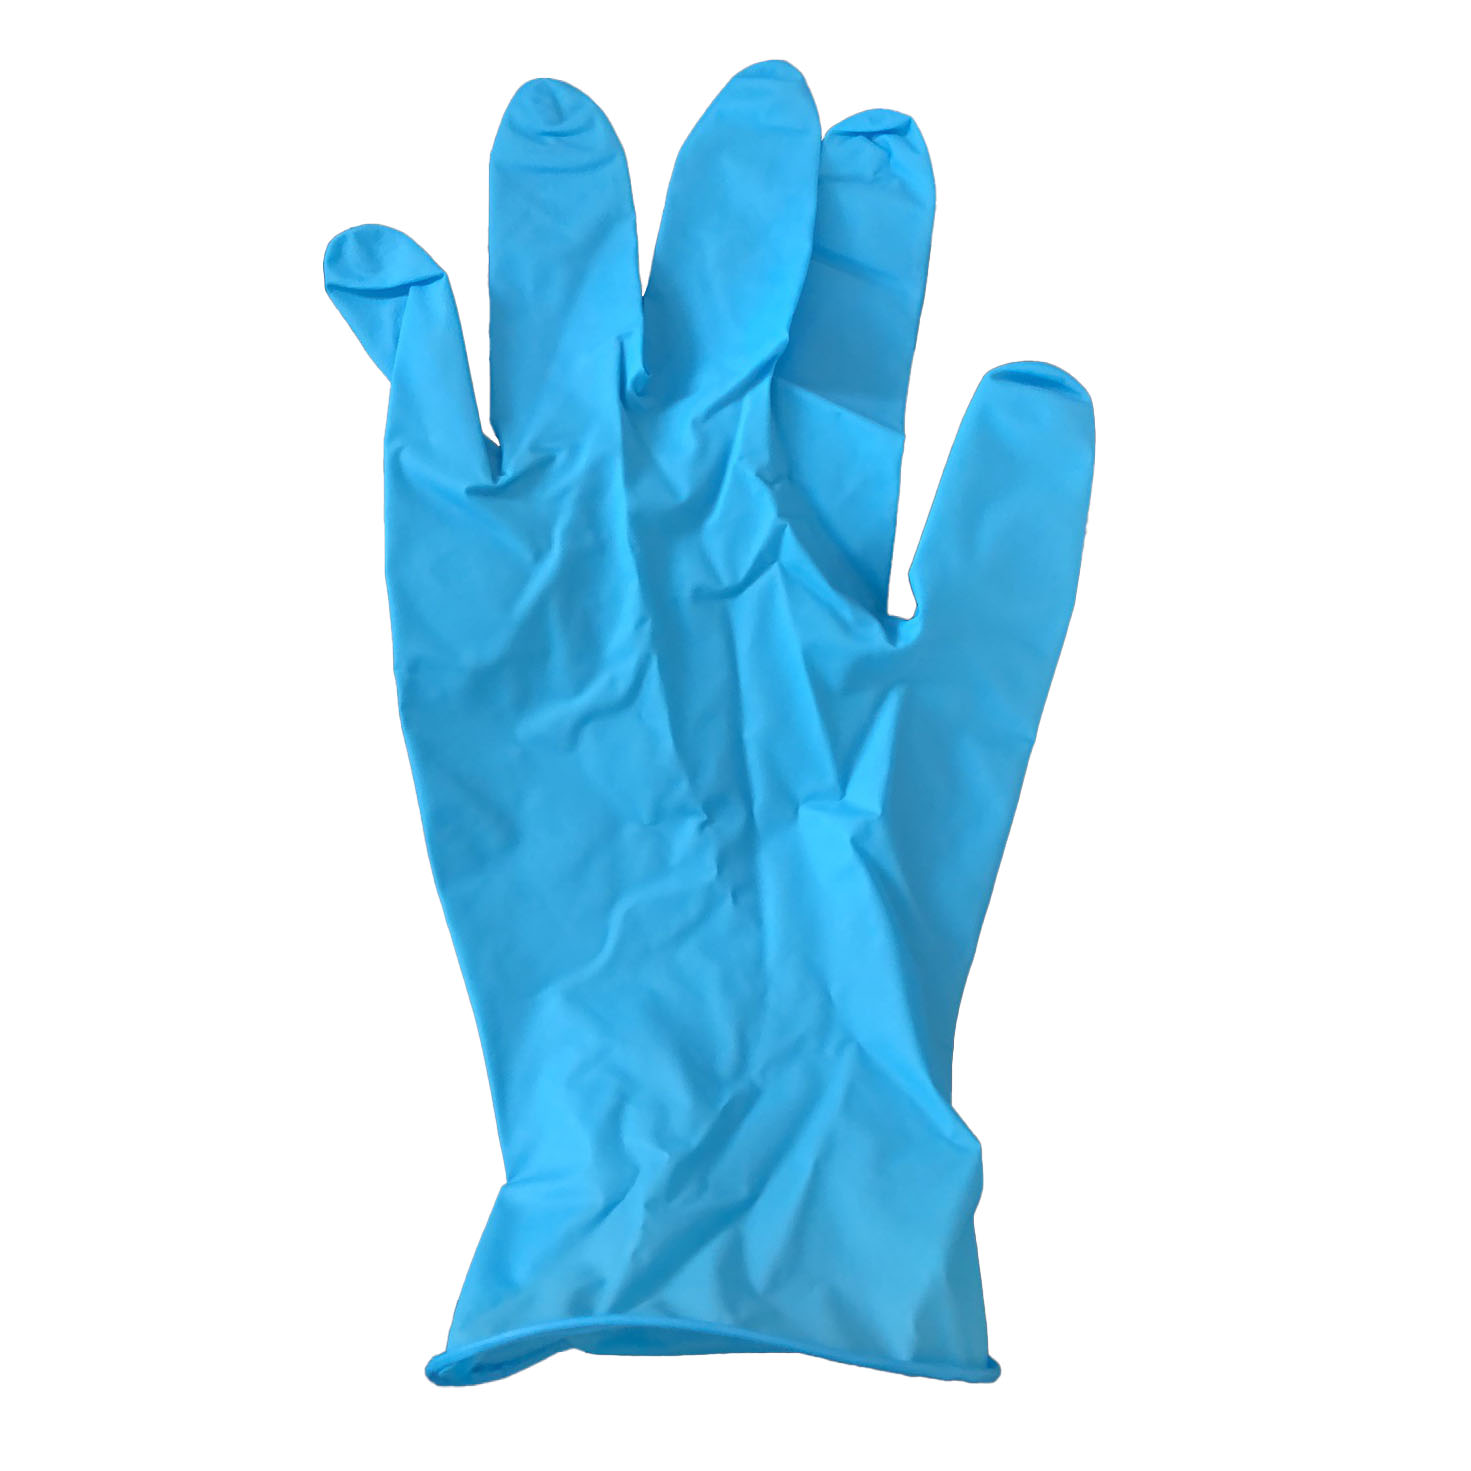 Buy food grade disposable nitrile gloves cost